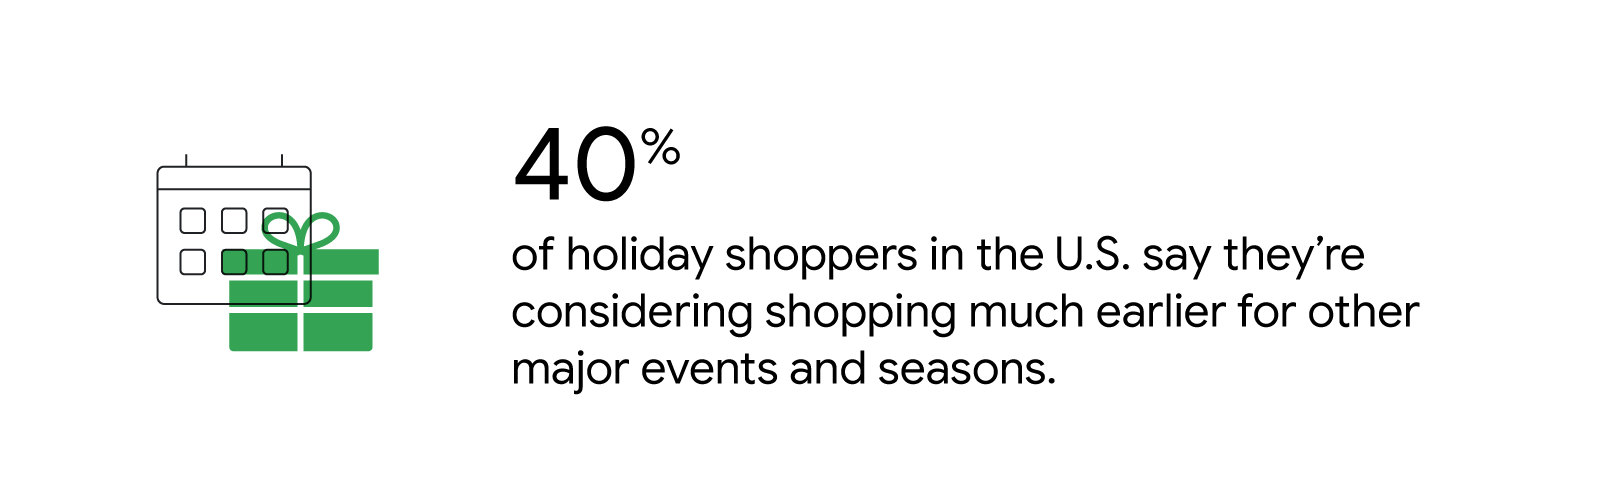 A wrapped gift appears next to a calendar. 40% of holiday shoppers in the U.S. say they’re considering shopping much earlier for other major events and seasons.